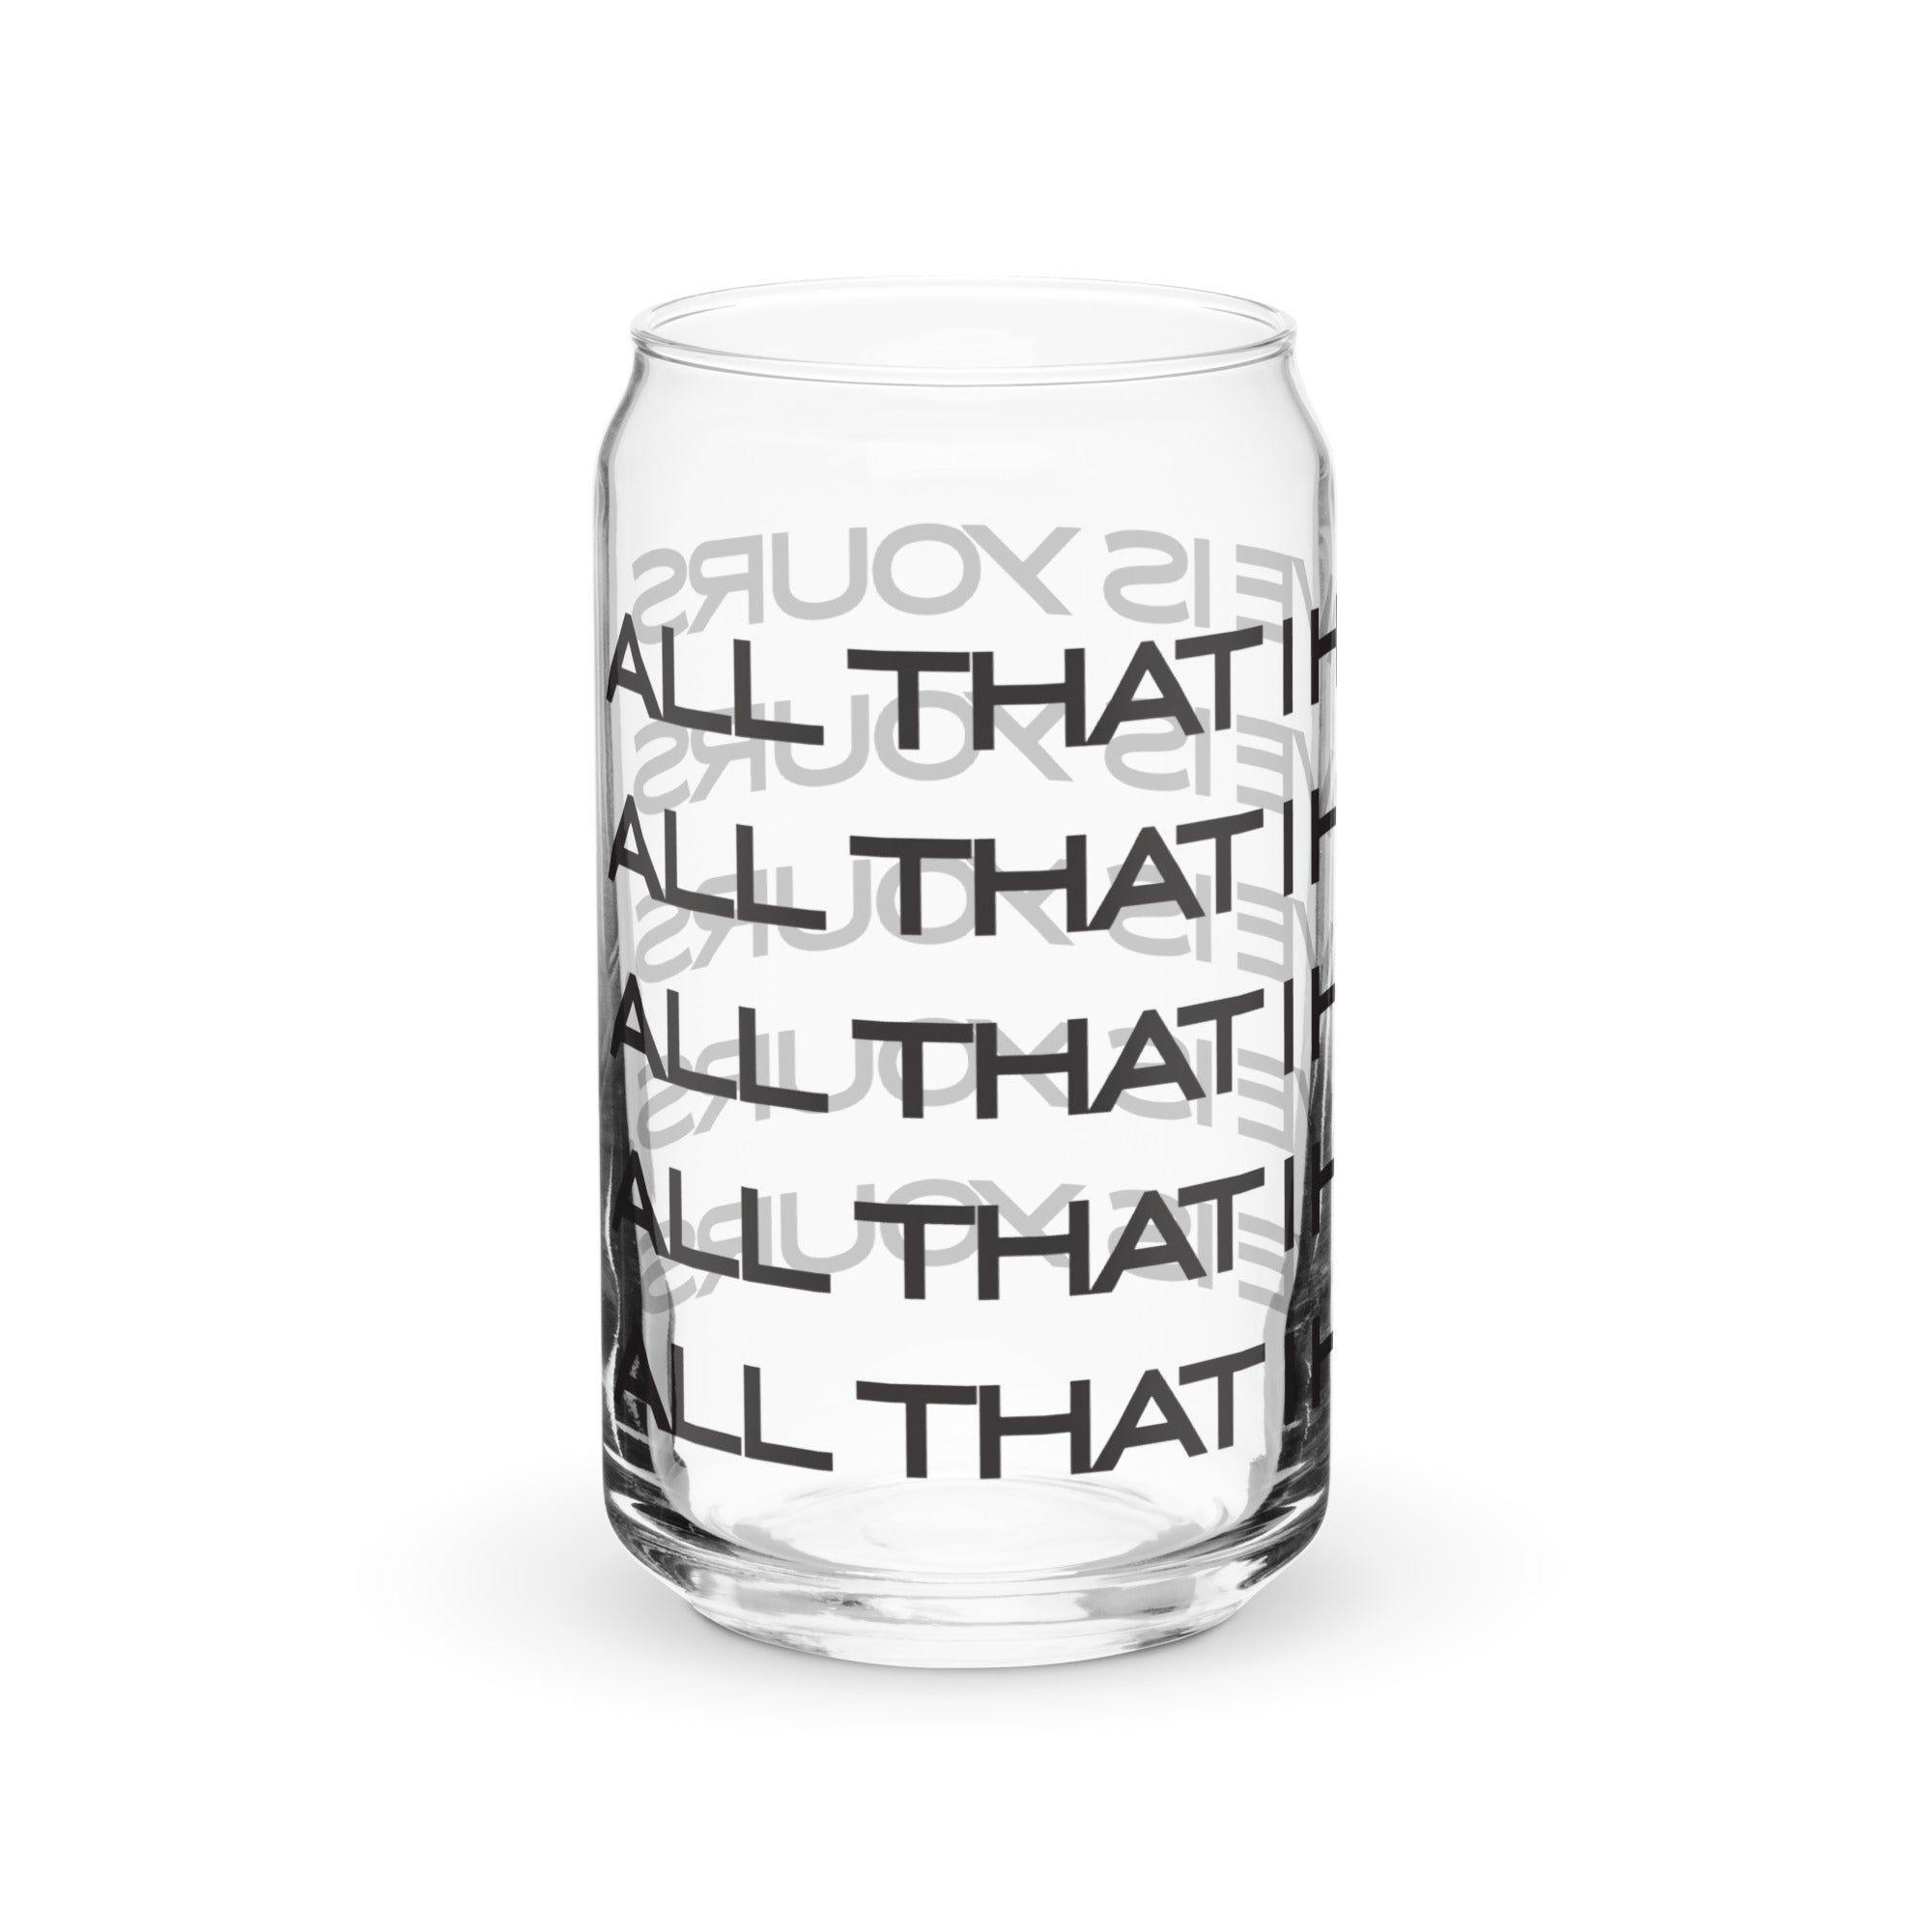 All That I Have Is Yours. (Glass, Black.)